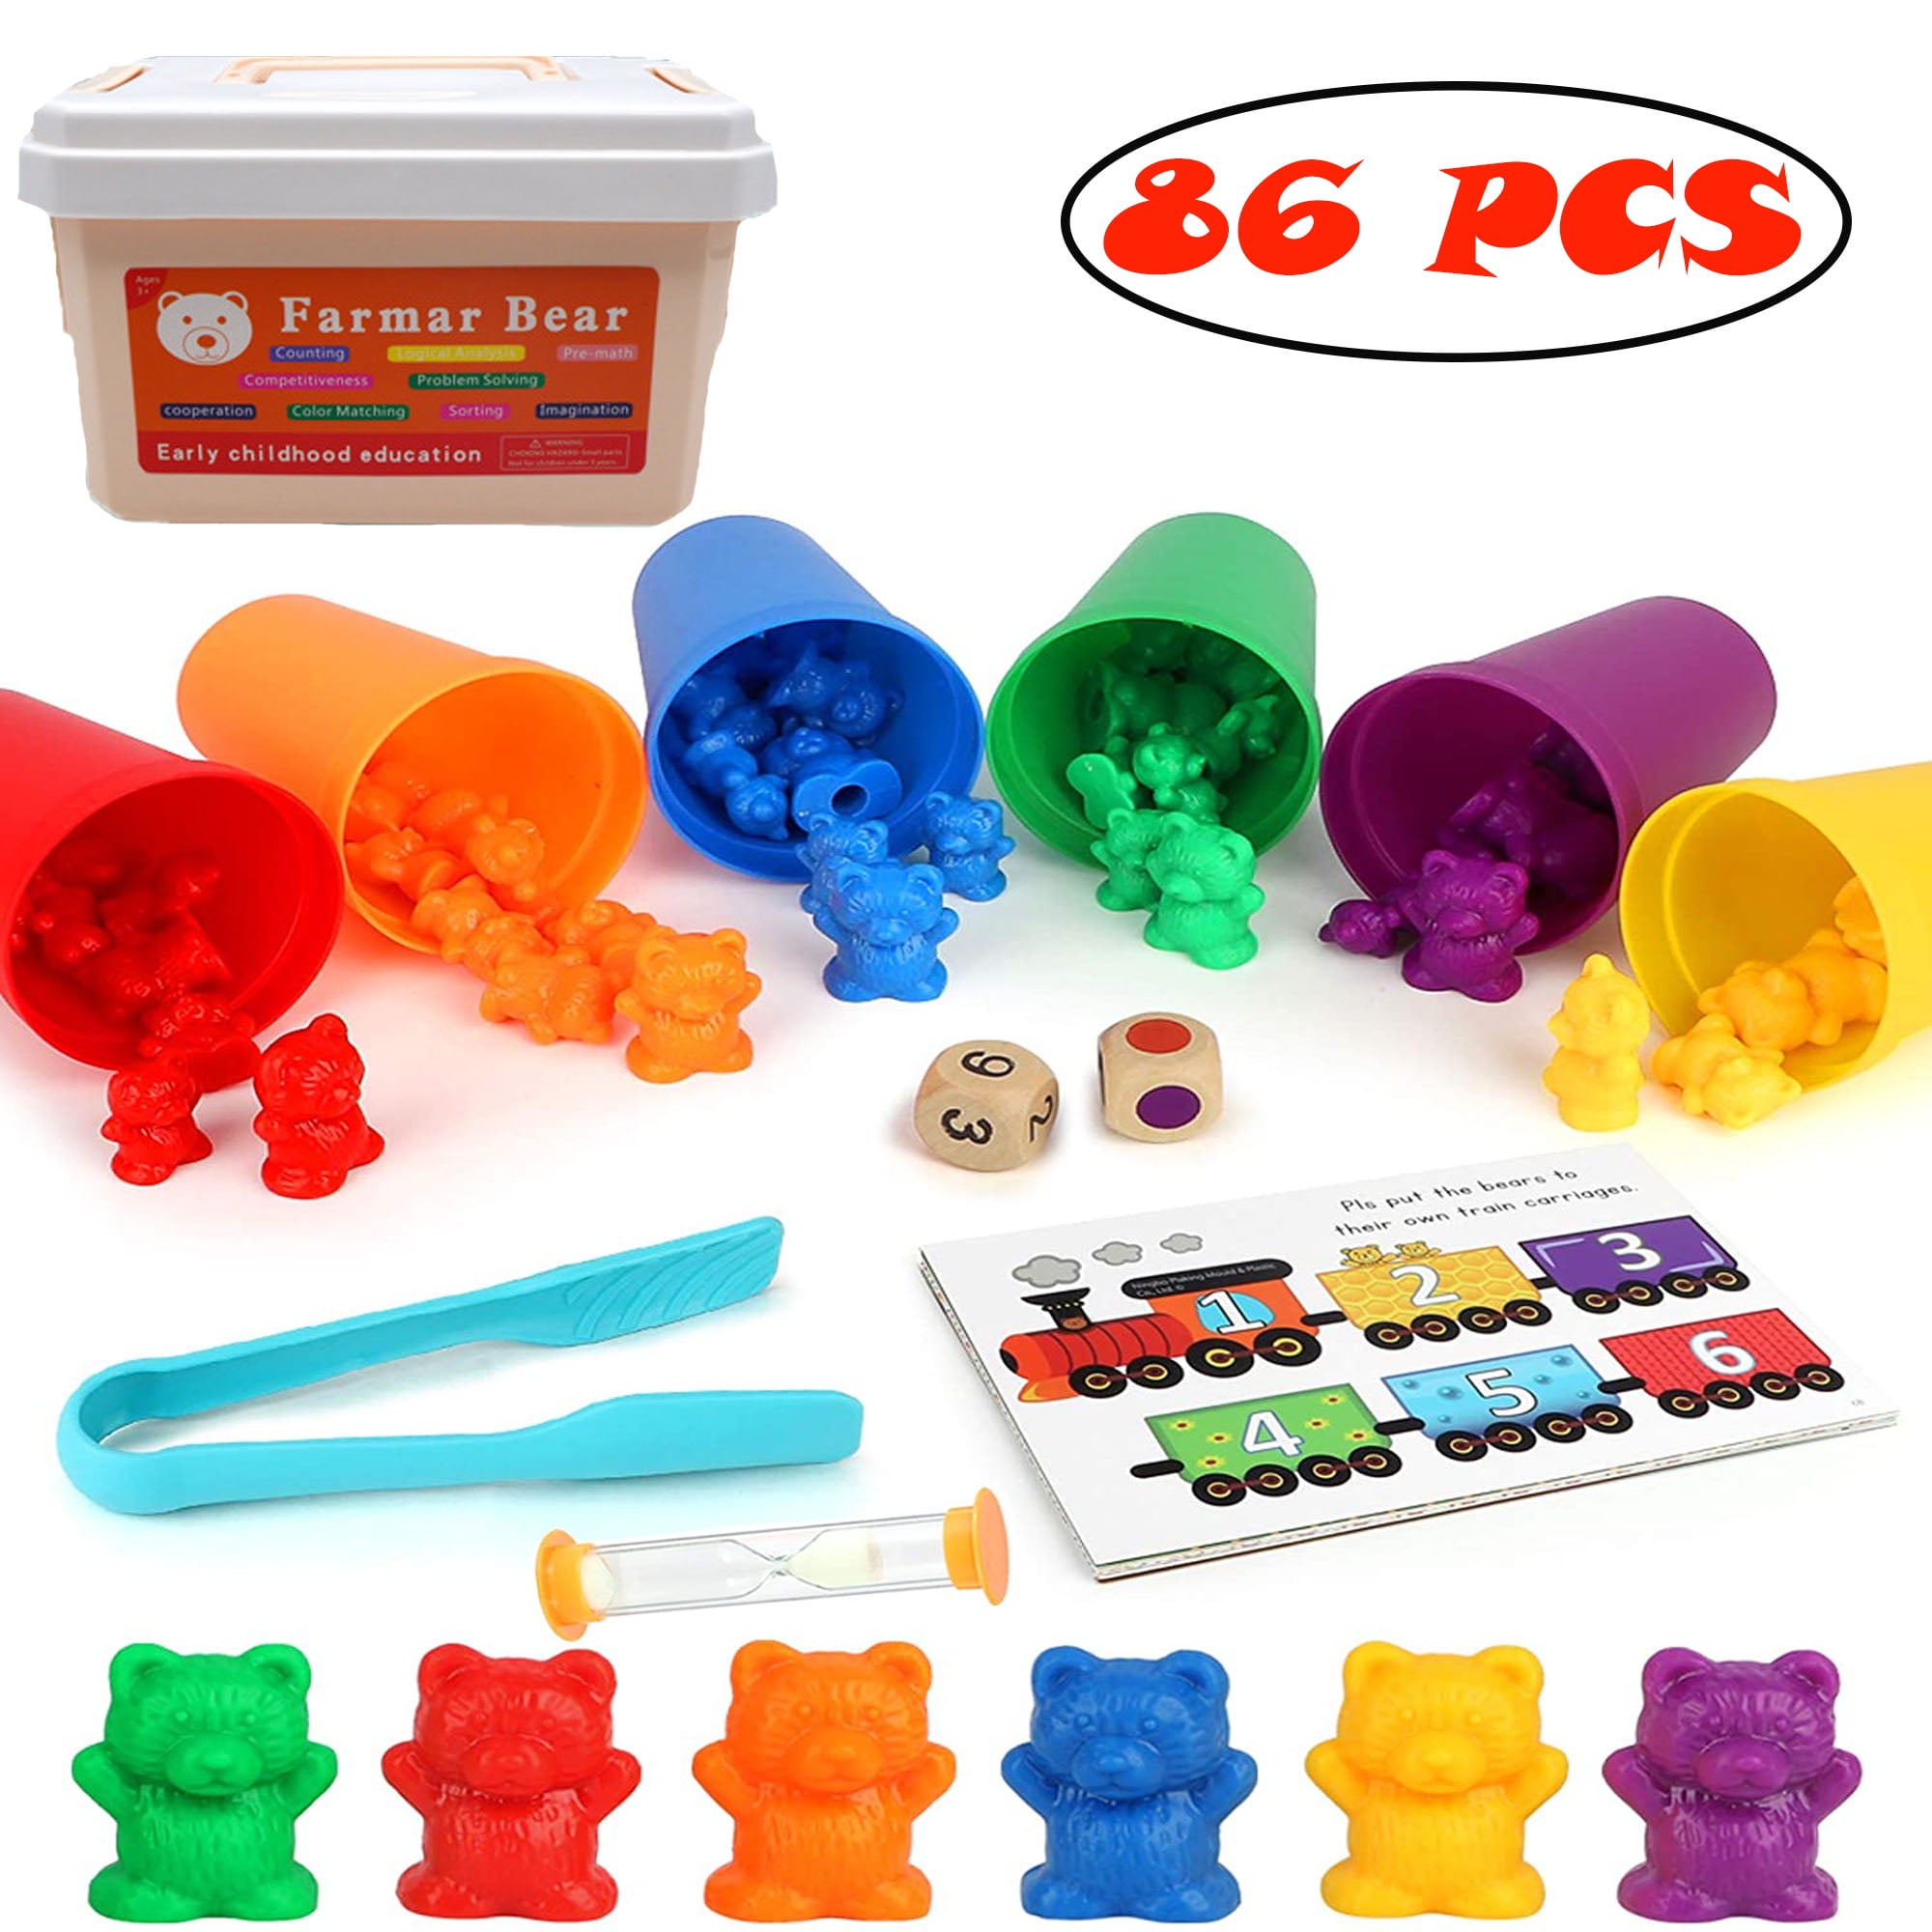 90pcs including activity cards Daju Counting Bears 